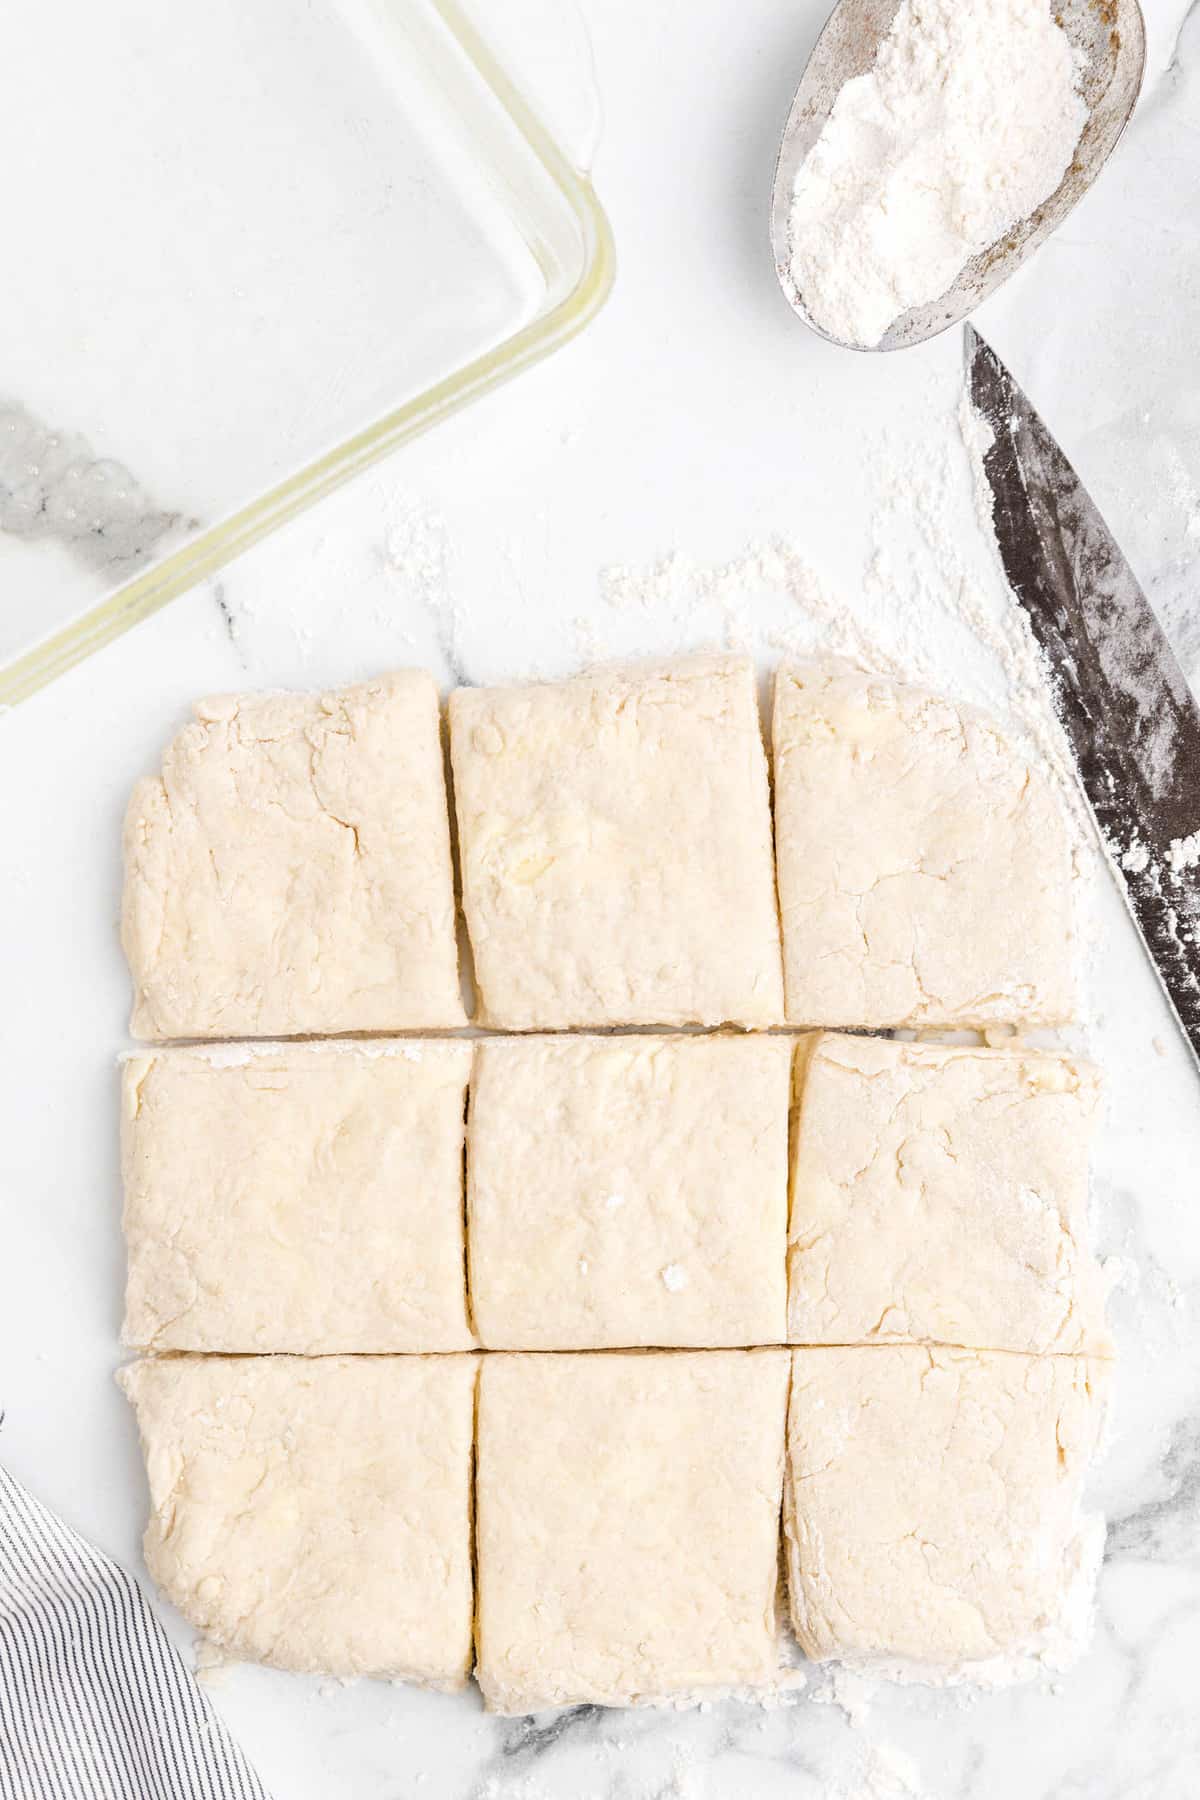 roll dough and cut into squares